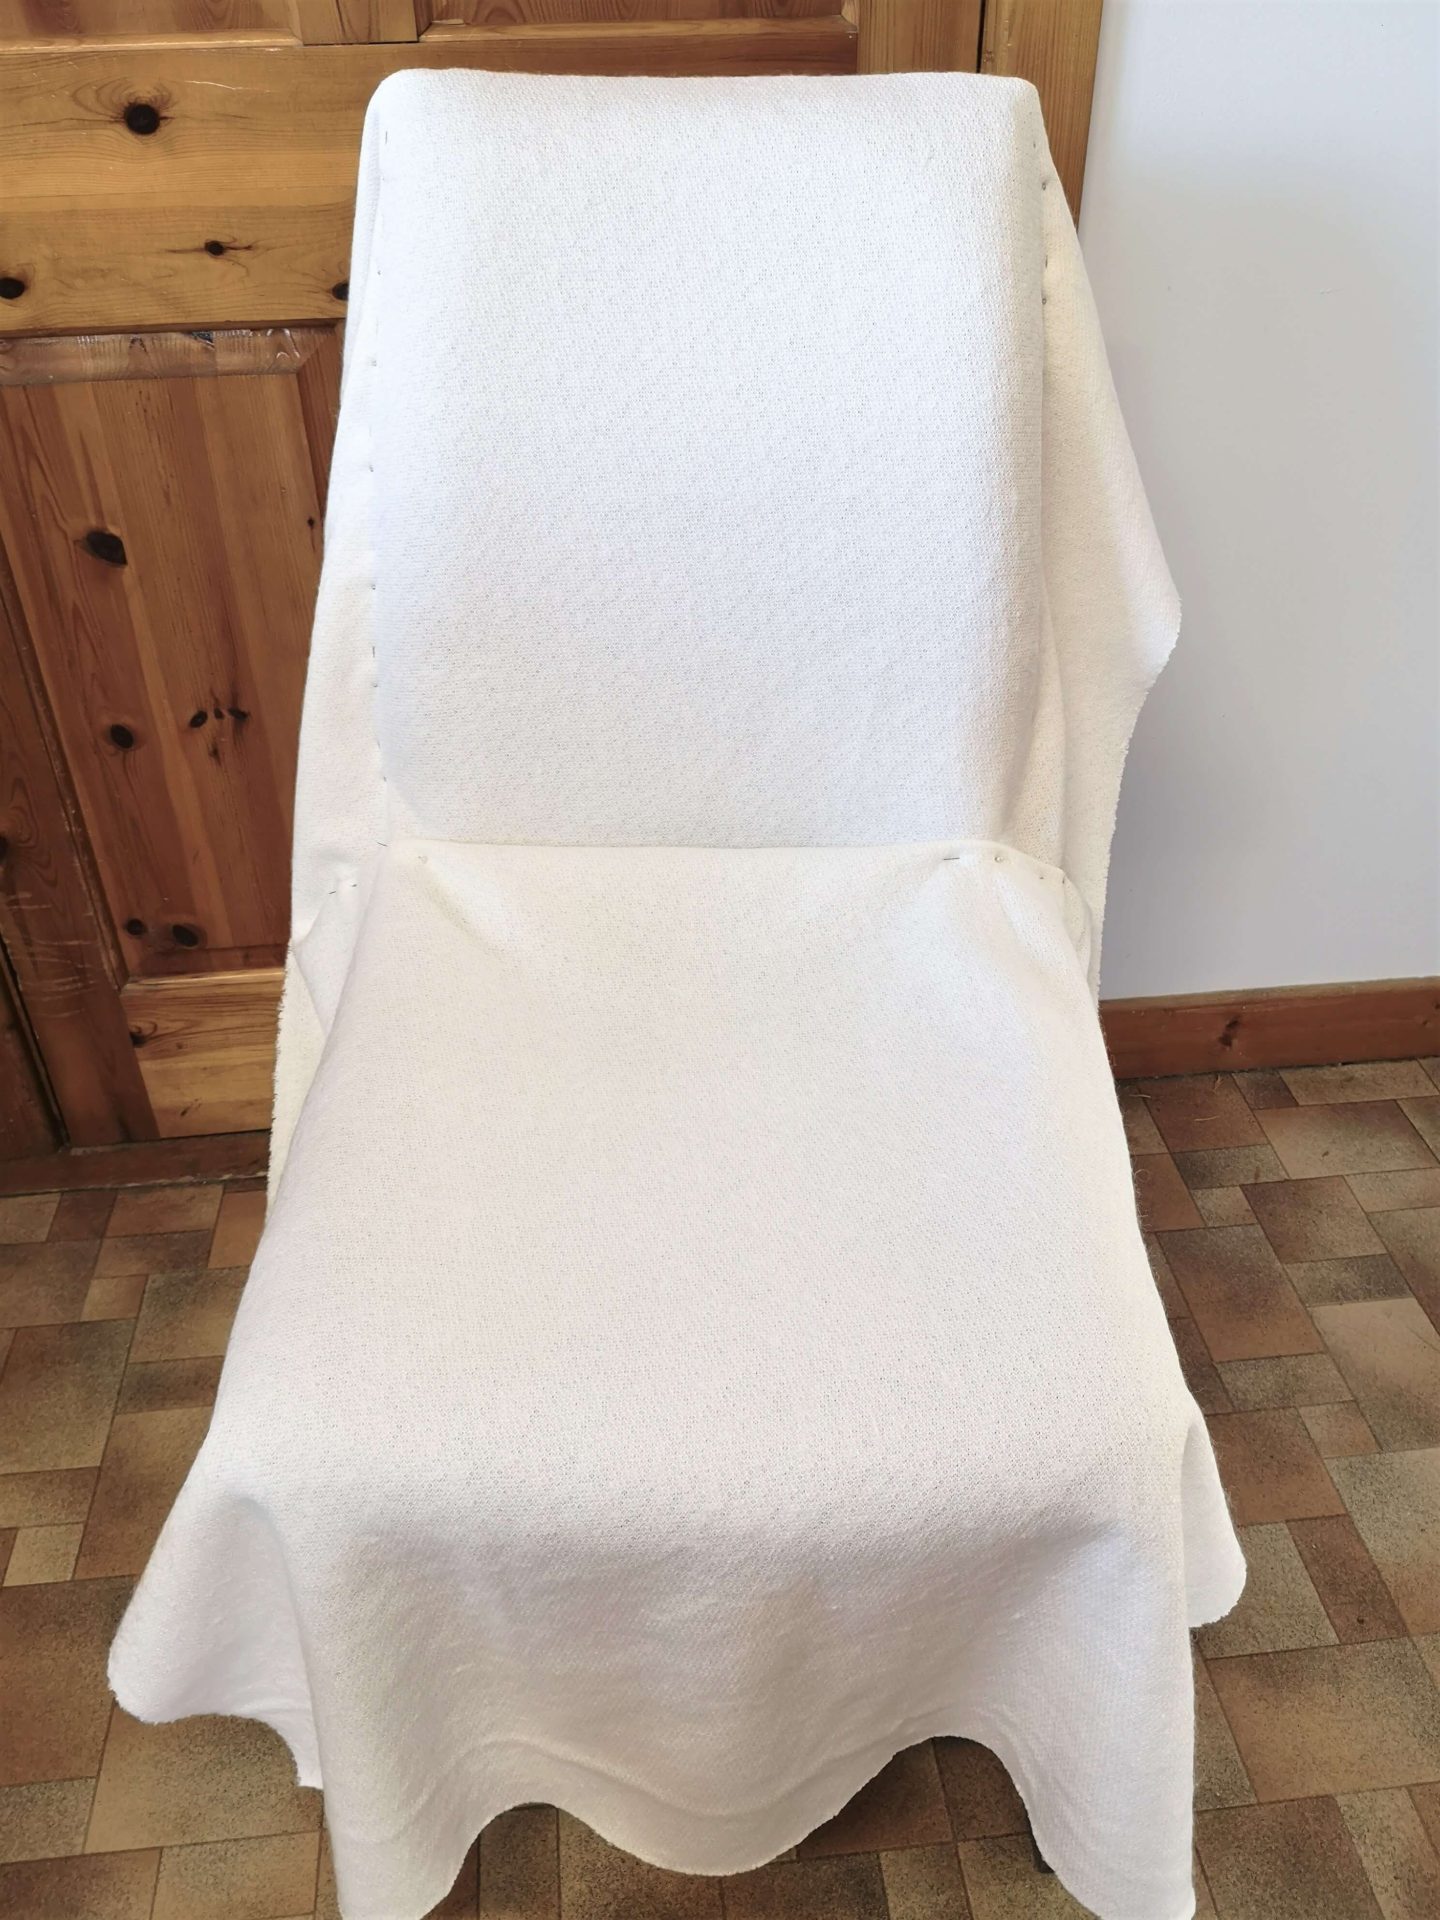 White material draped over a dining chair, held in place with pin needles.